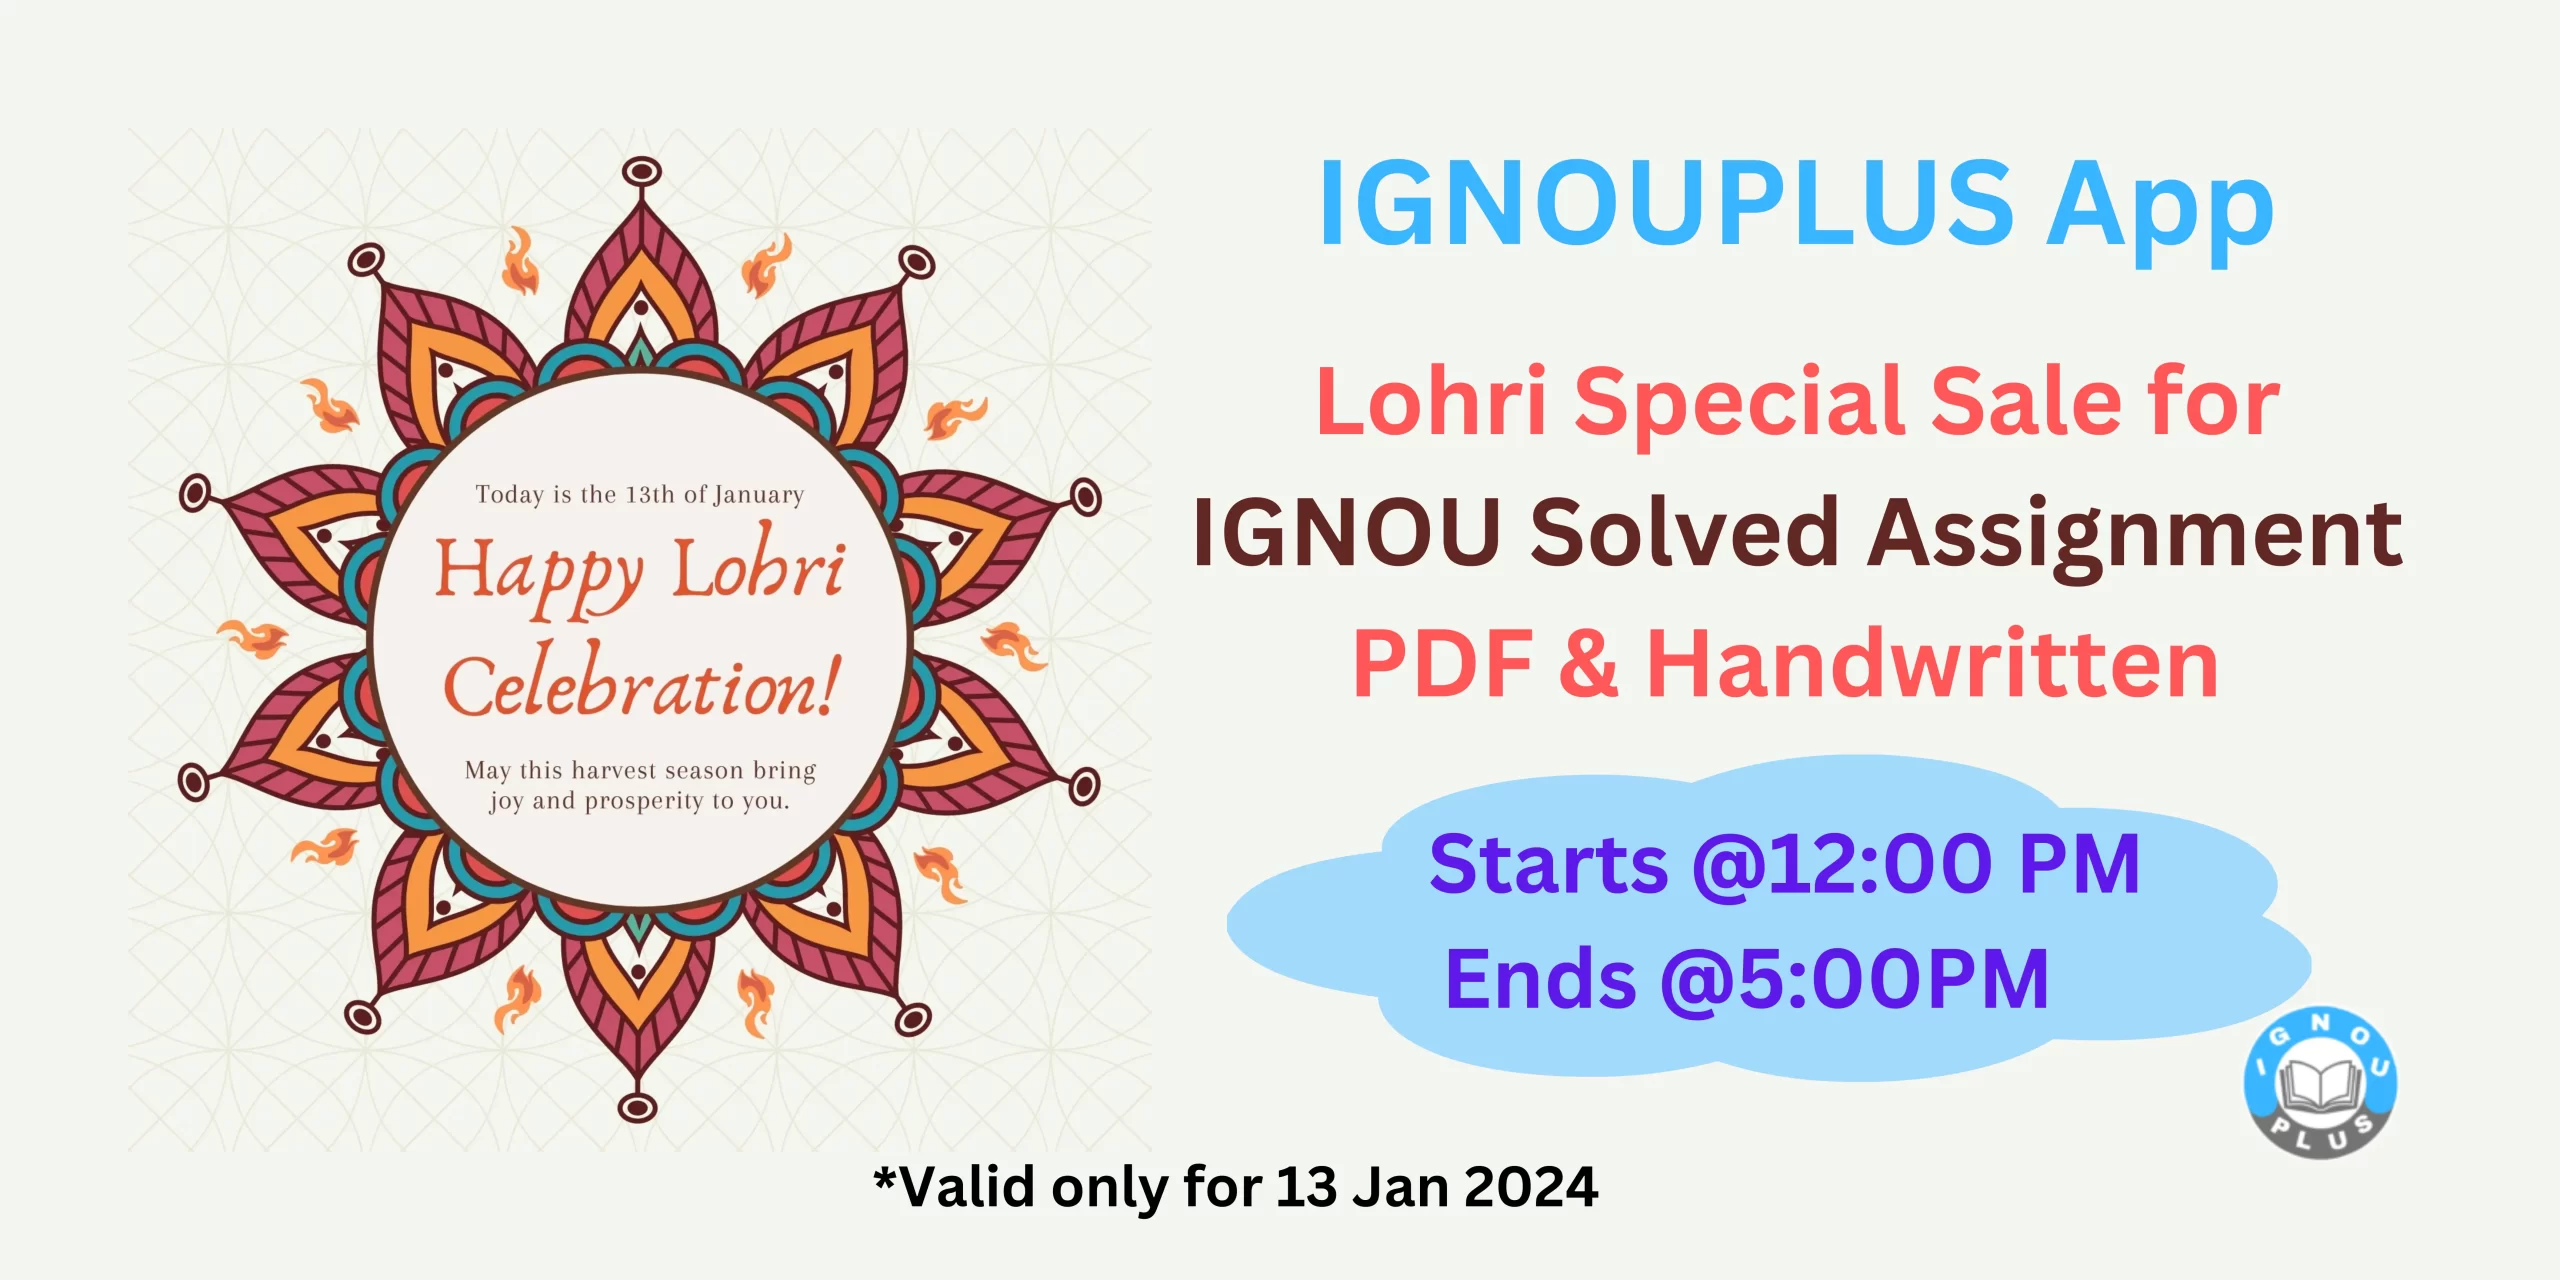 Lohri Special Sale for IGNOU Solved Assignment PDF’s & Handwritten Notes